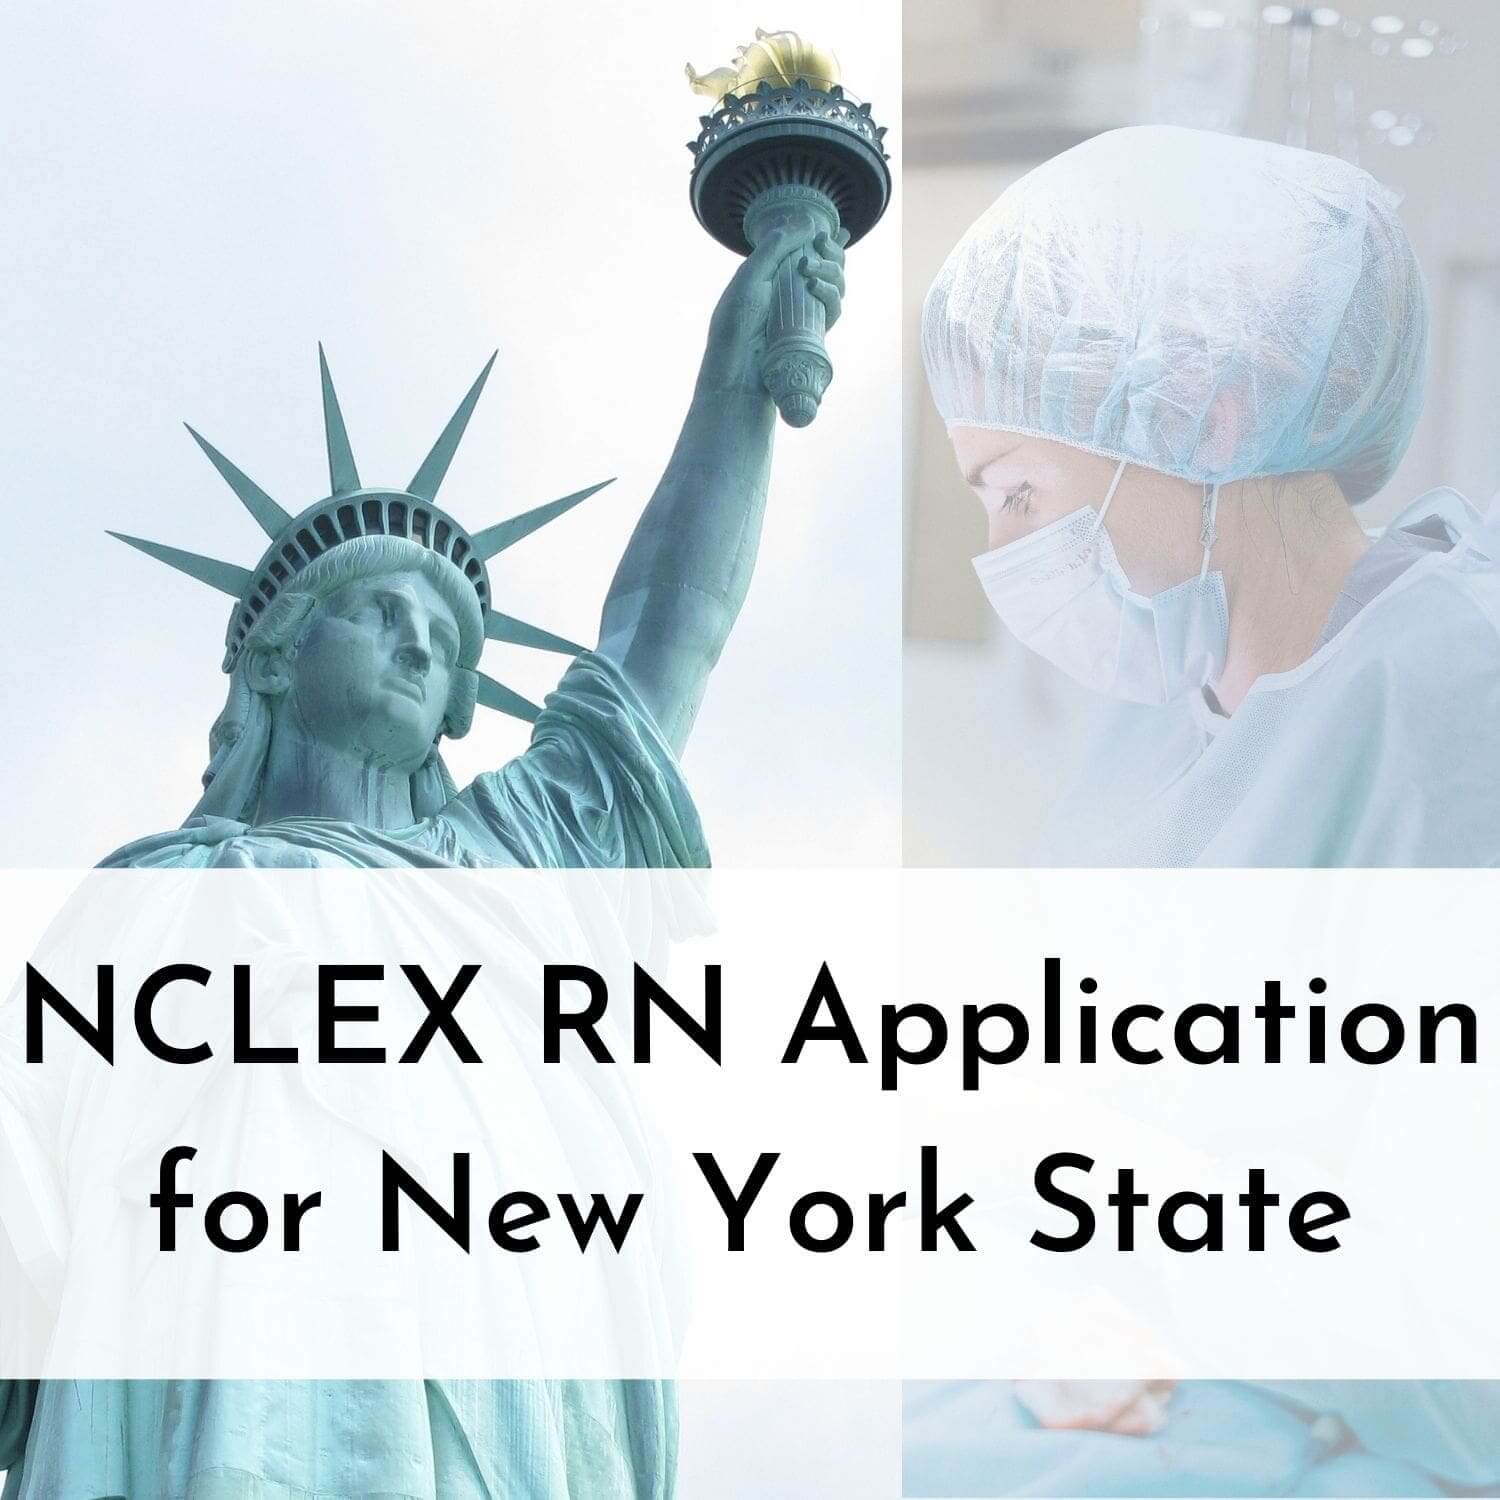 NCLEX RN Application for New York State